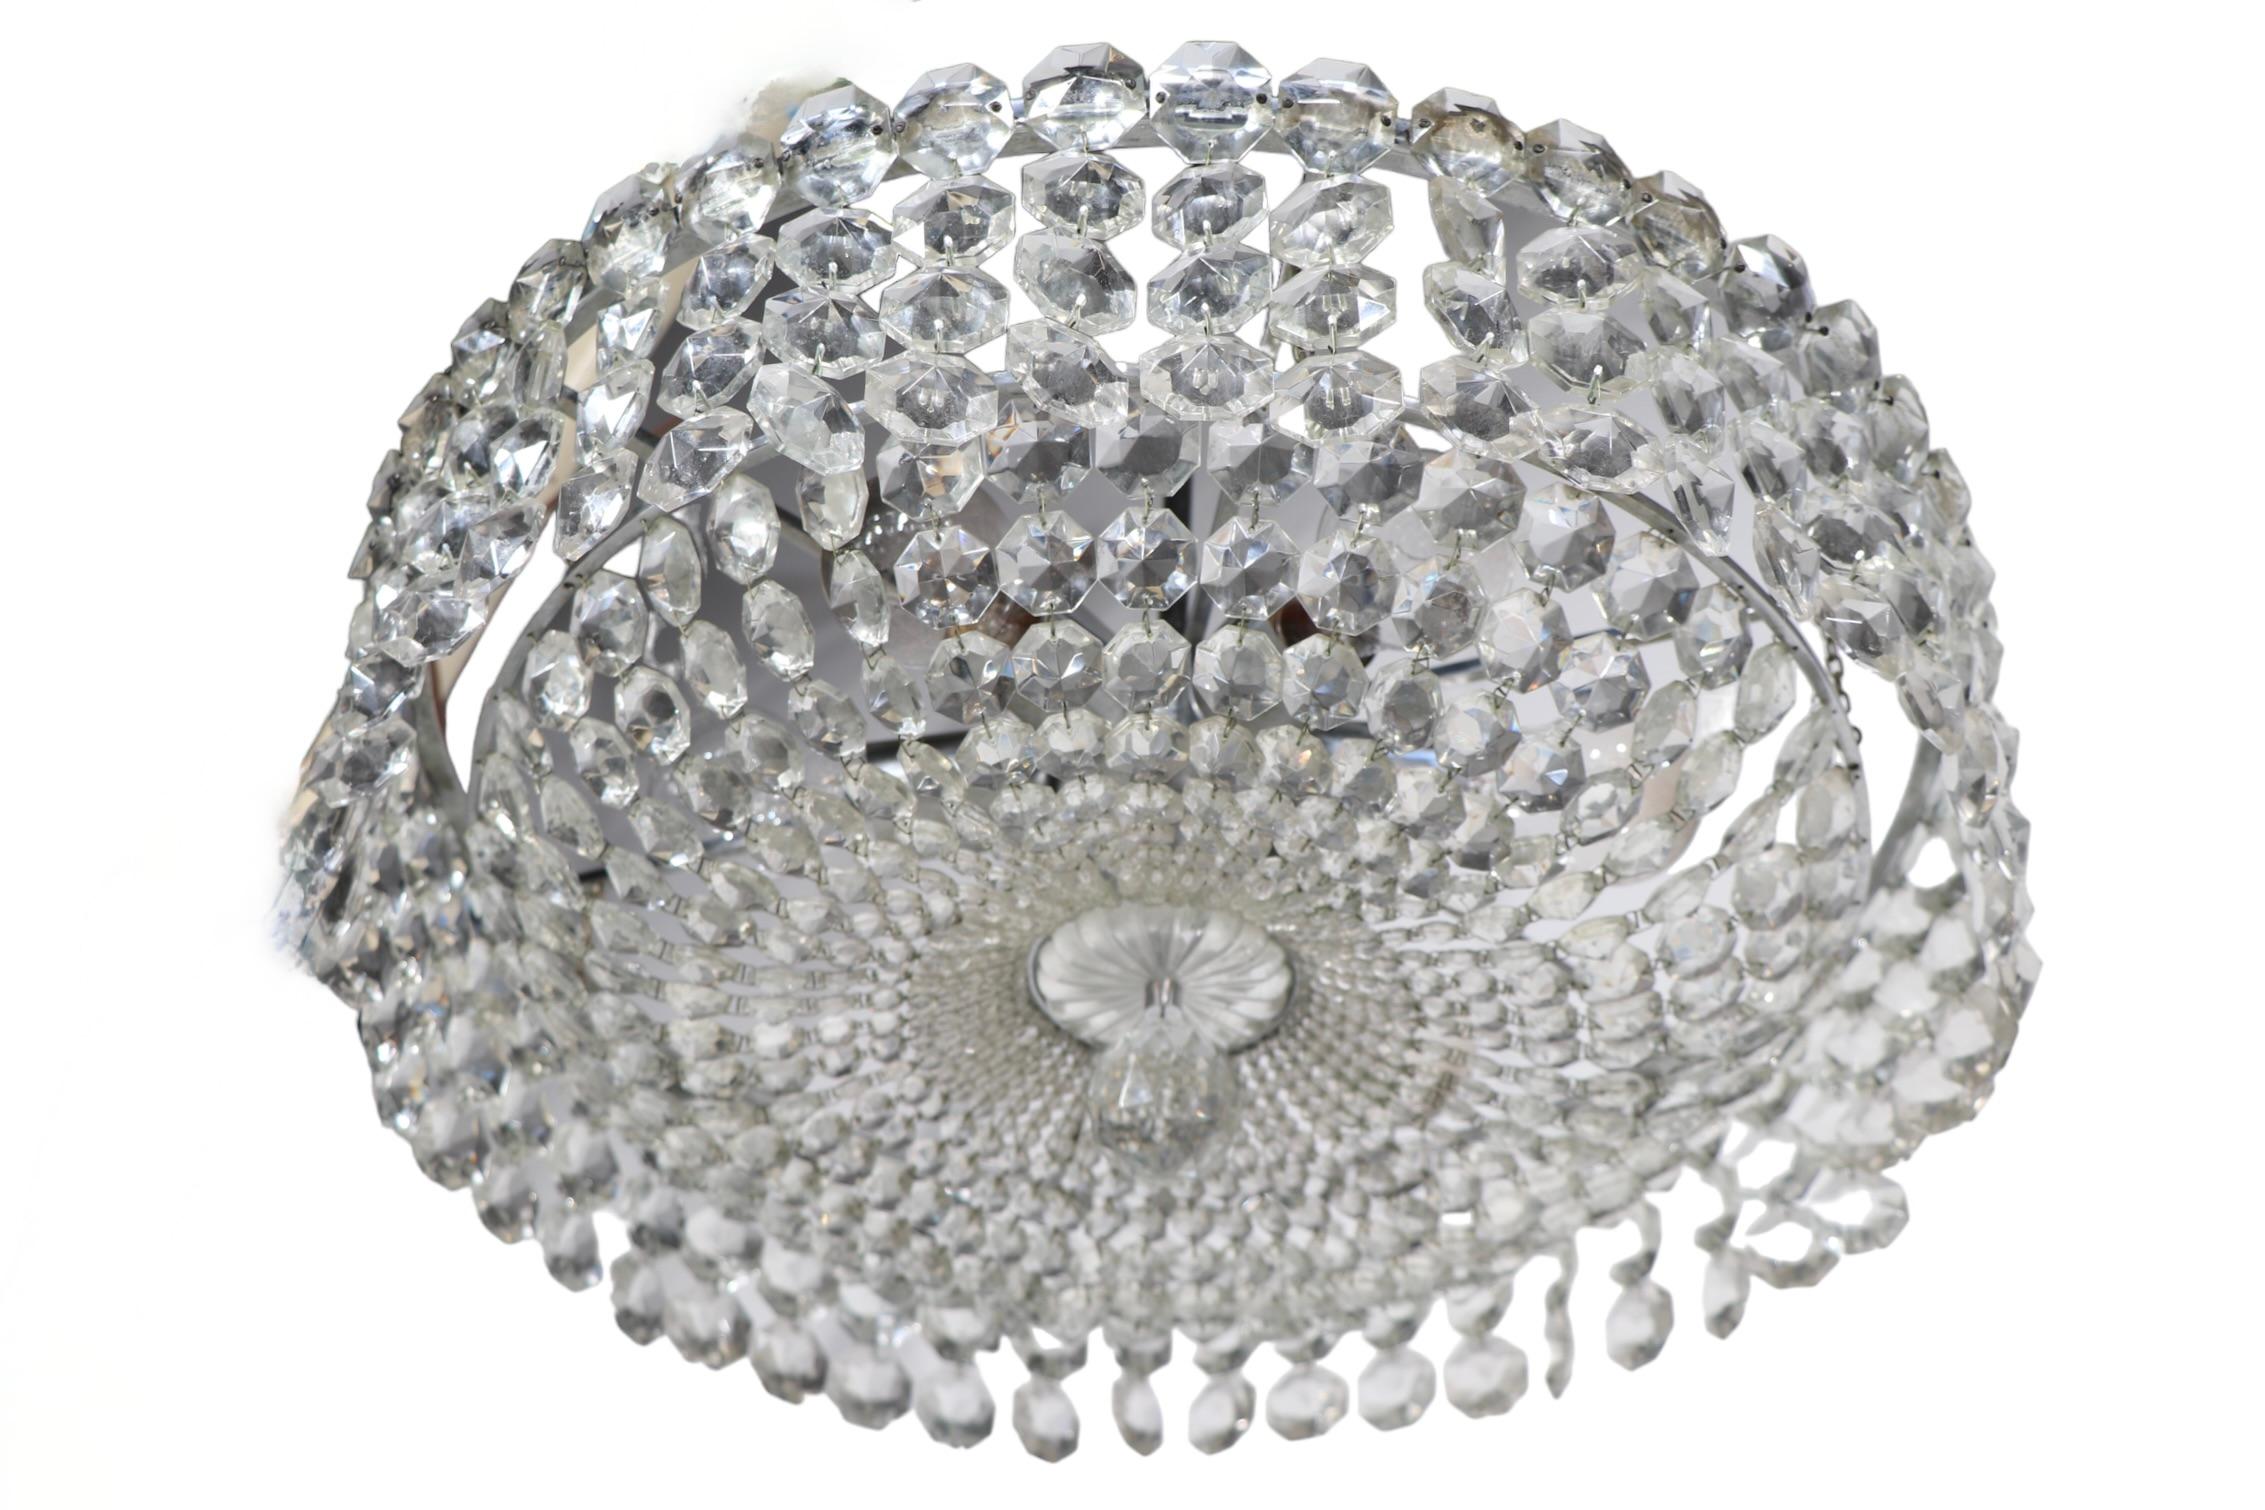 American Faceted Glass Bead Basket  Chandelier by Prescolite c 1960/1970's  For Sale